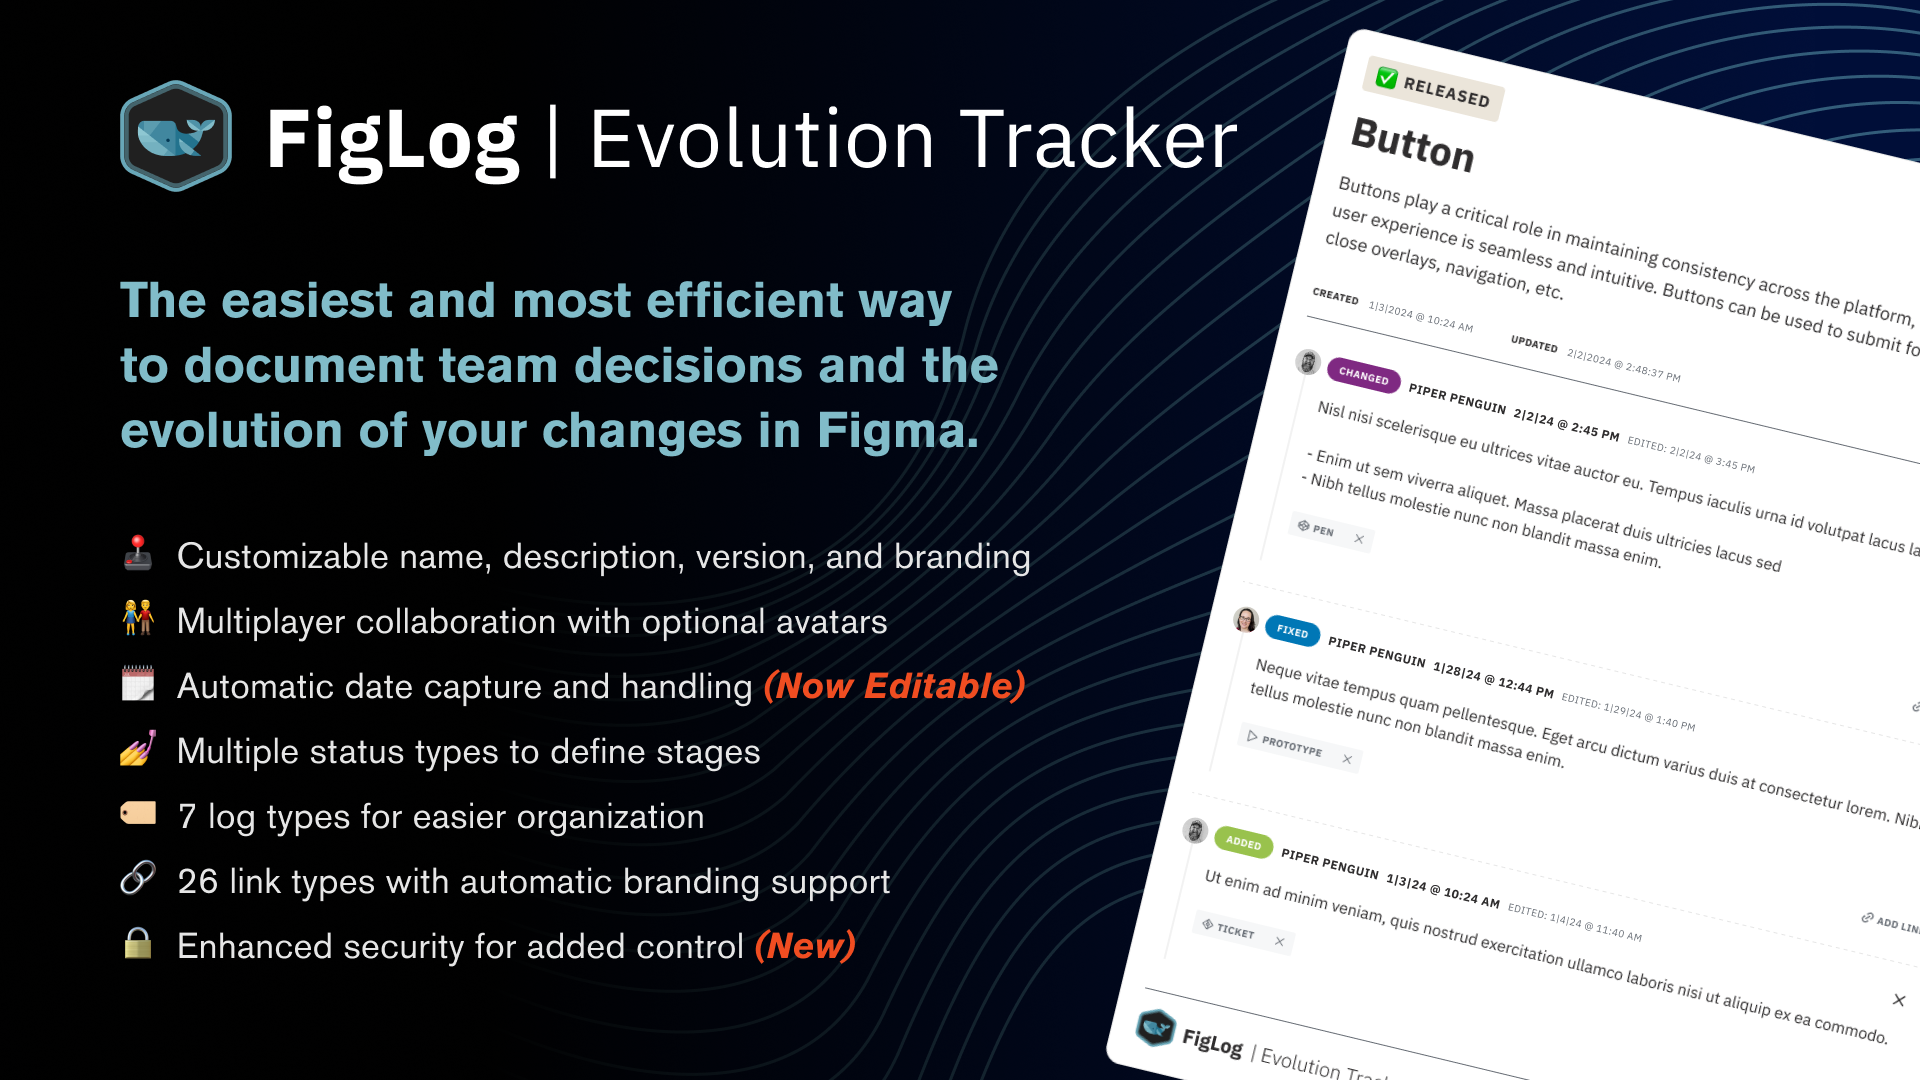 FigLog Evolution Tracker Widget for Figma by Nearform_Commerce - We build beautifully designed, solidly engineered, performant digital experiences for humans, just like you.